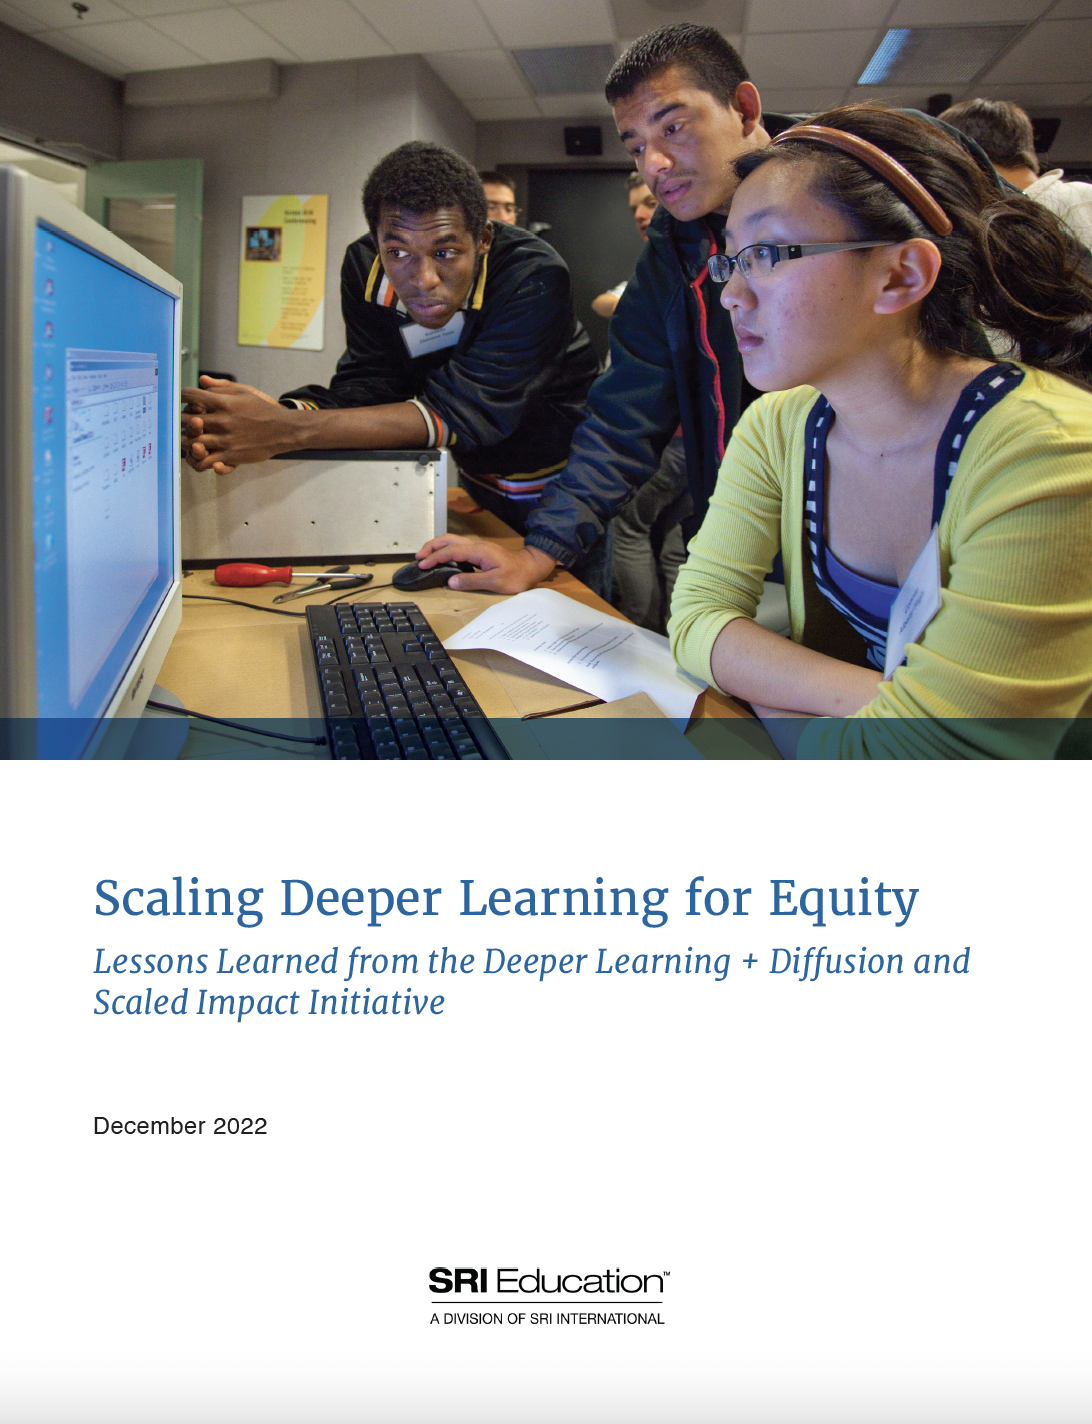 Thumbnail of report cover Scaling Deeper Learning for Equity.